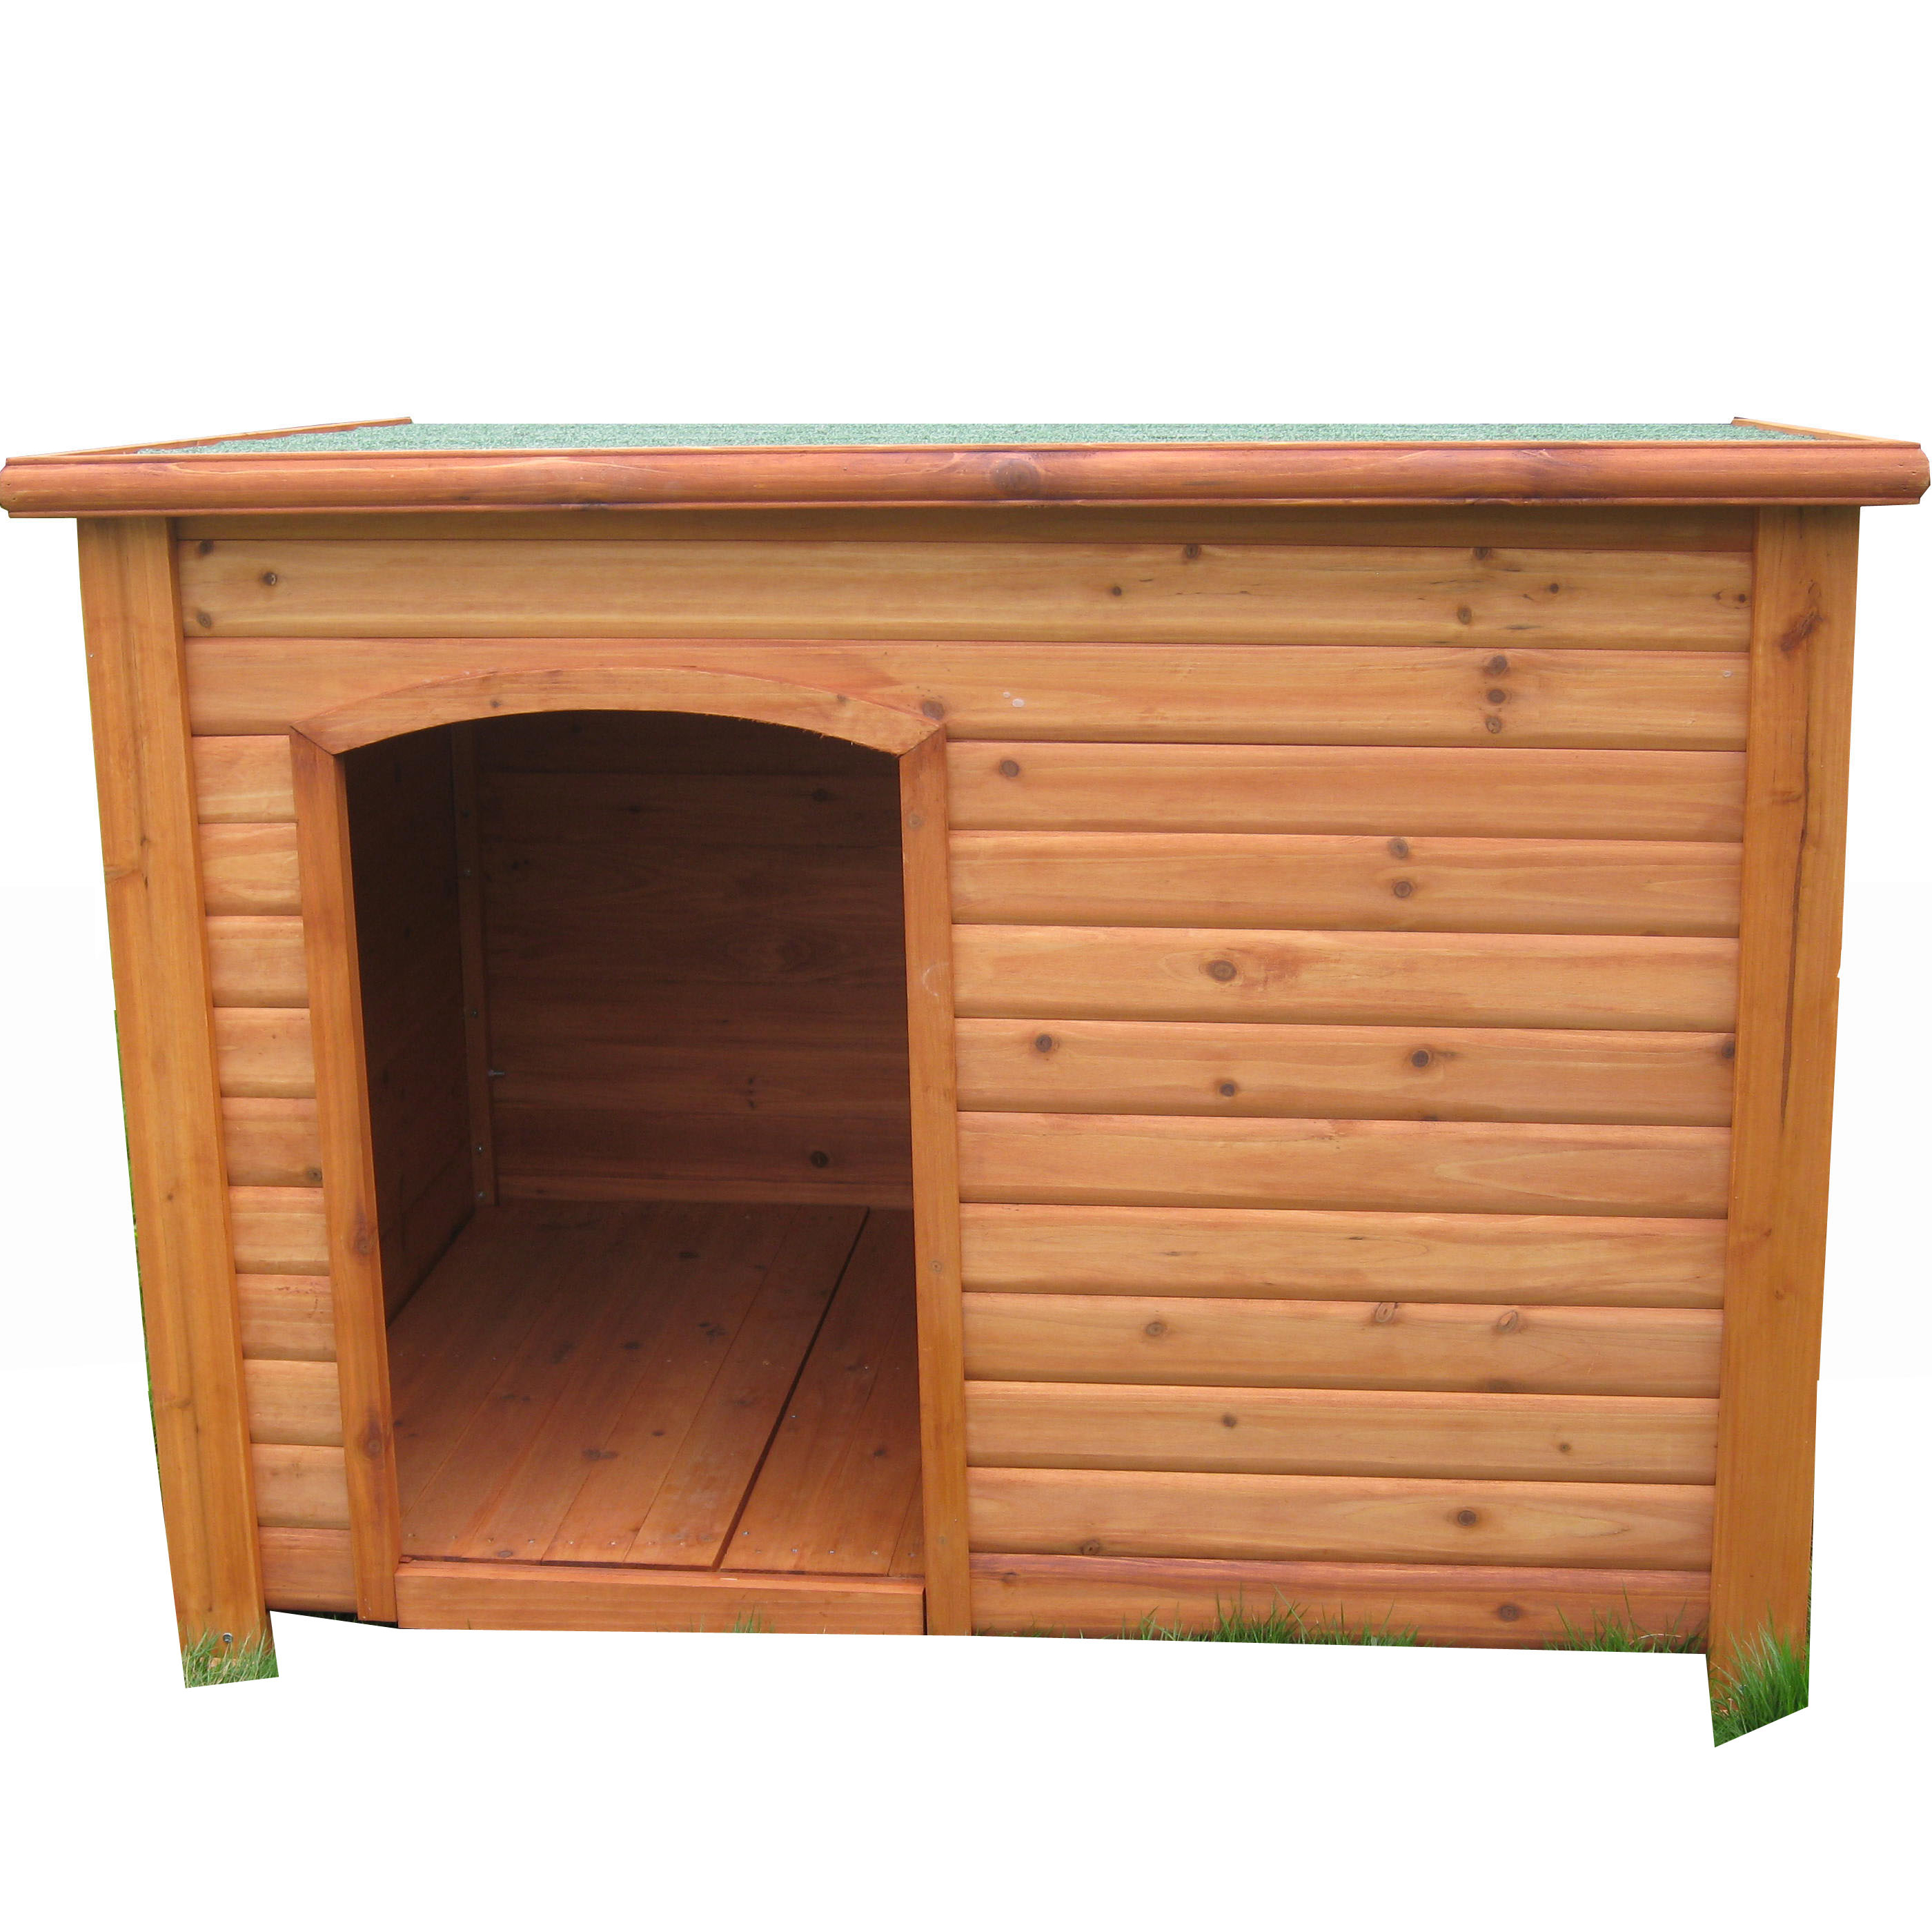 Wholesale large wooden dog house outdoor wooden dog kennel cage for sale cheap